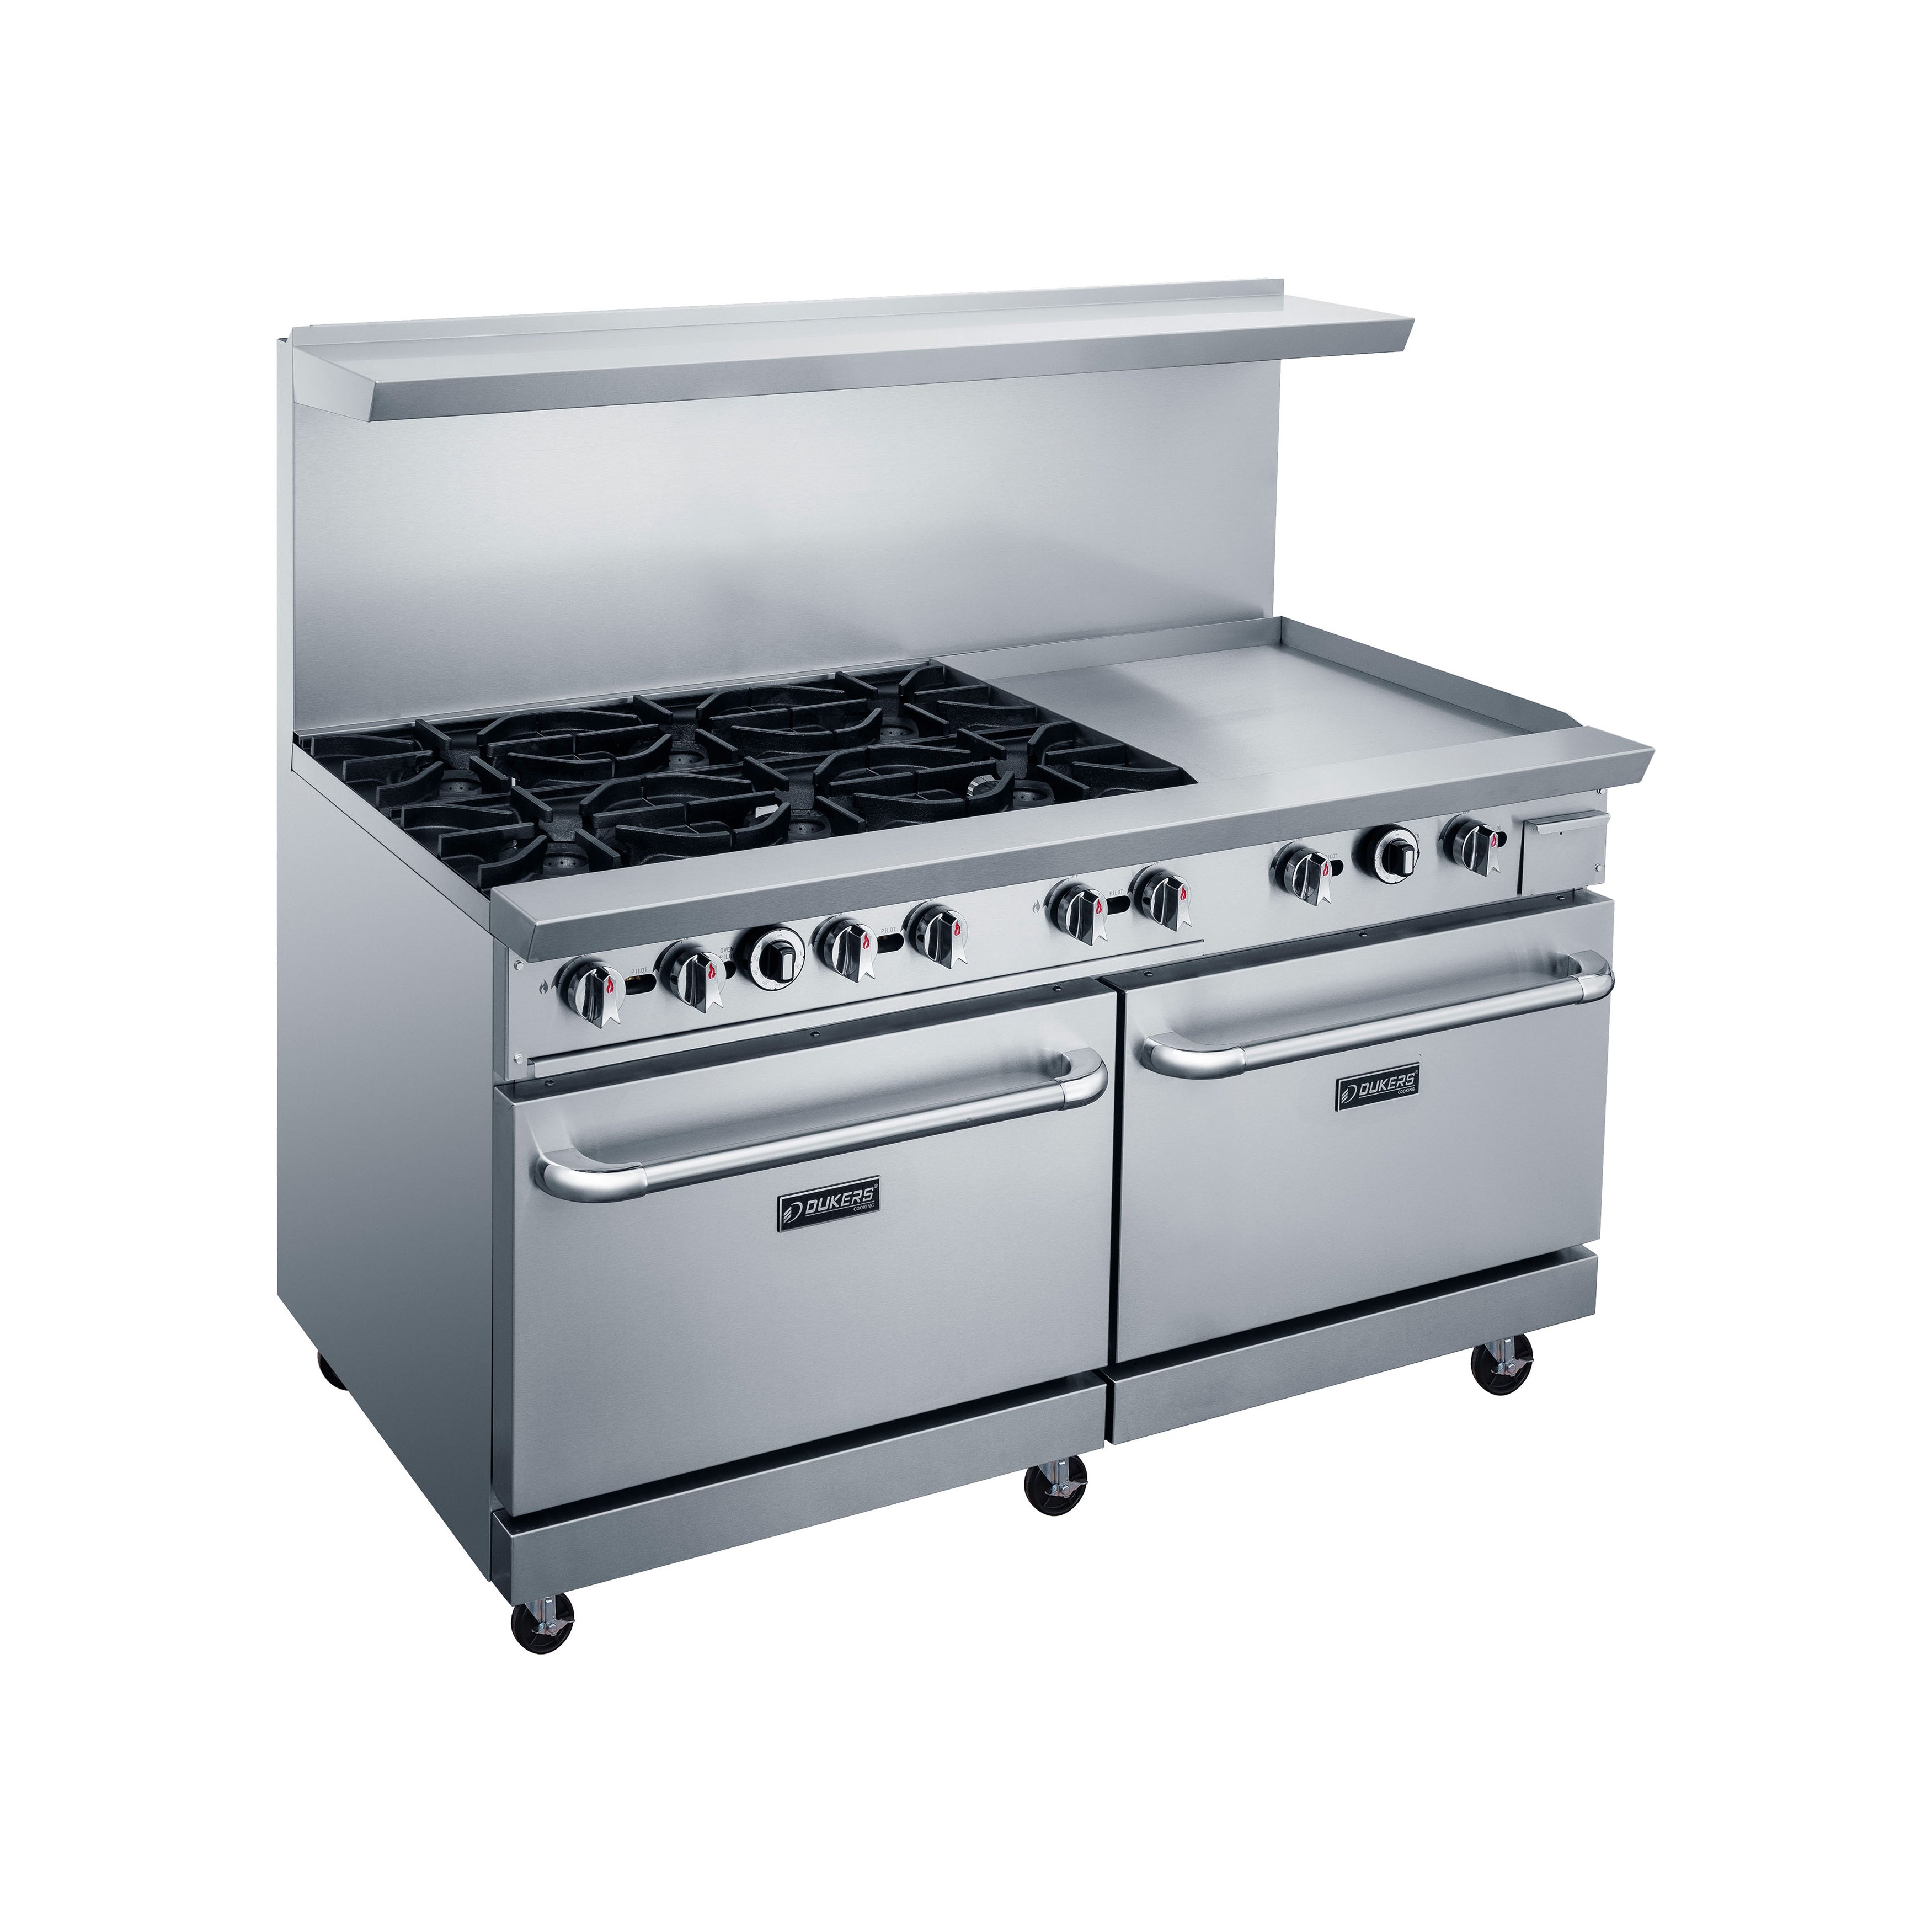 Dukers - DCR60-6B24GM, Commercial 60" Oven Range Six Open Burner with 24" Griddle Natural Gas